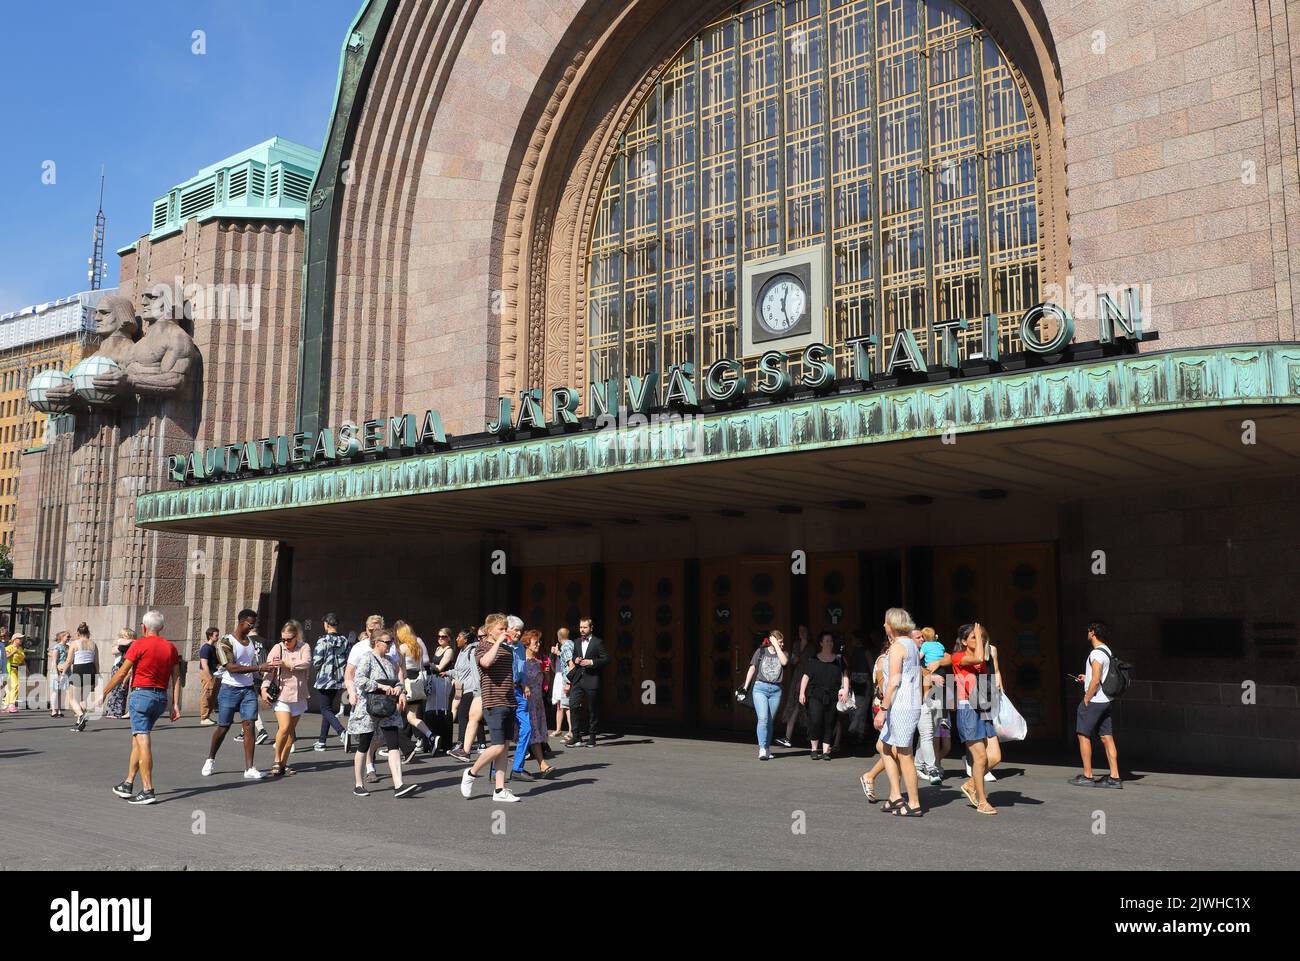 Helsinki, Finland - August 20, 2022: The main entrance to the Helsinki Central railroad station. Stock Photo